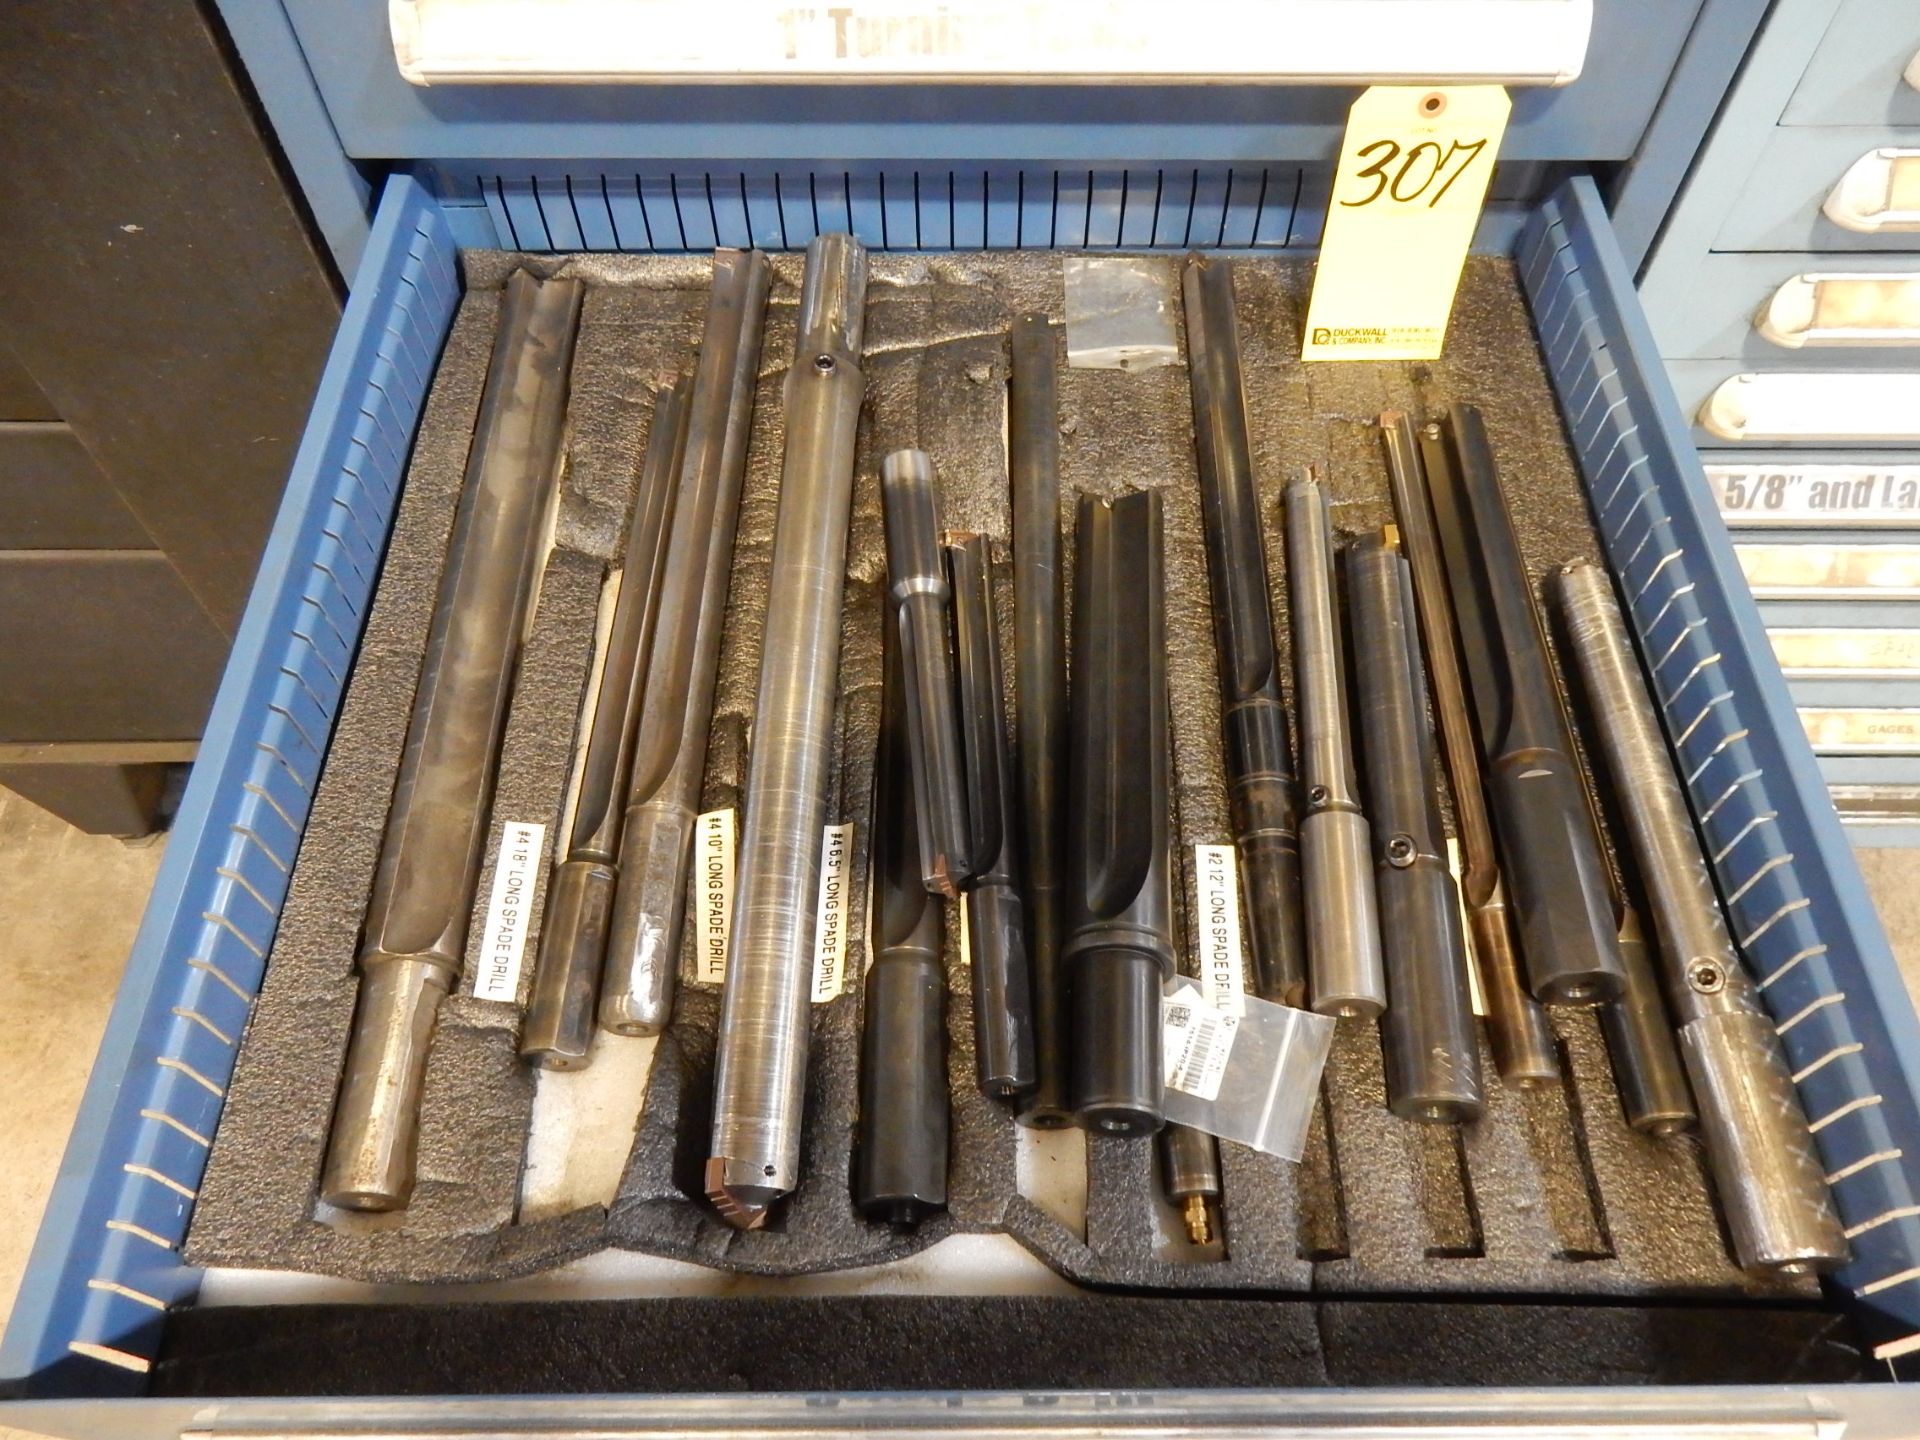 CONTENTS OF DRAWER - SPADE DRILLS